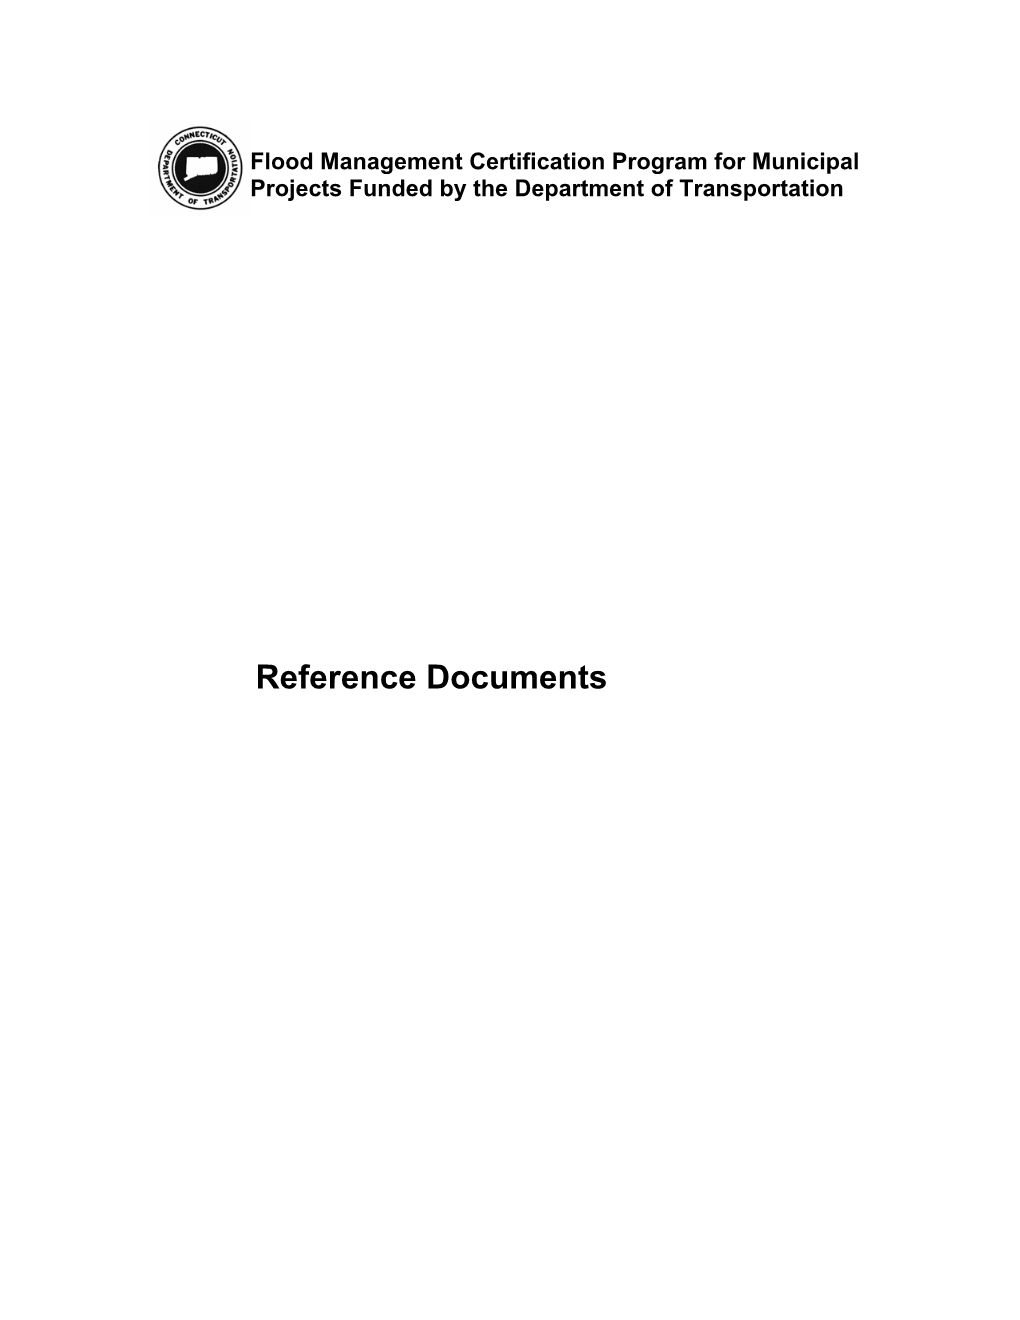 Flood Management Certification Reference Material